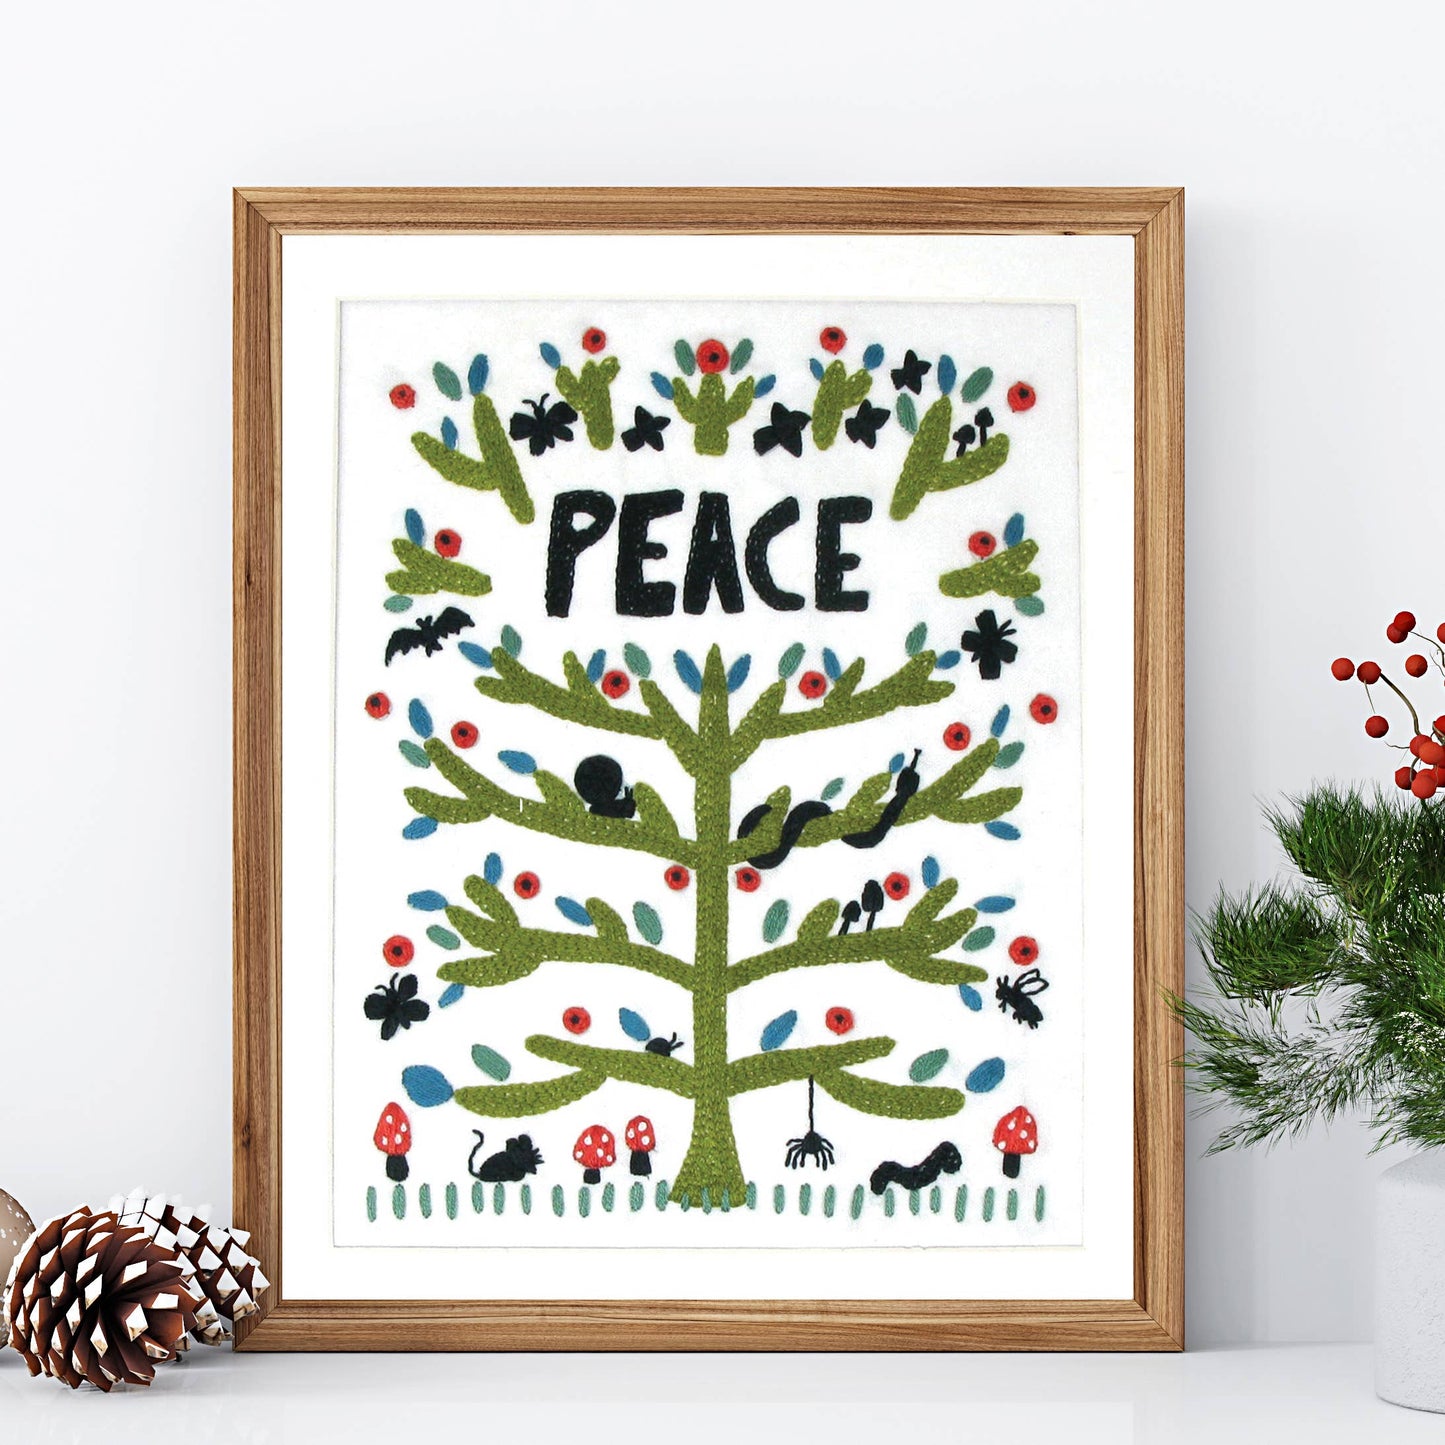 Peace embroidery kit - homesewn